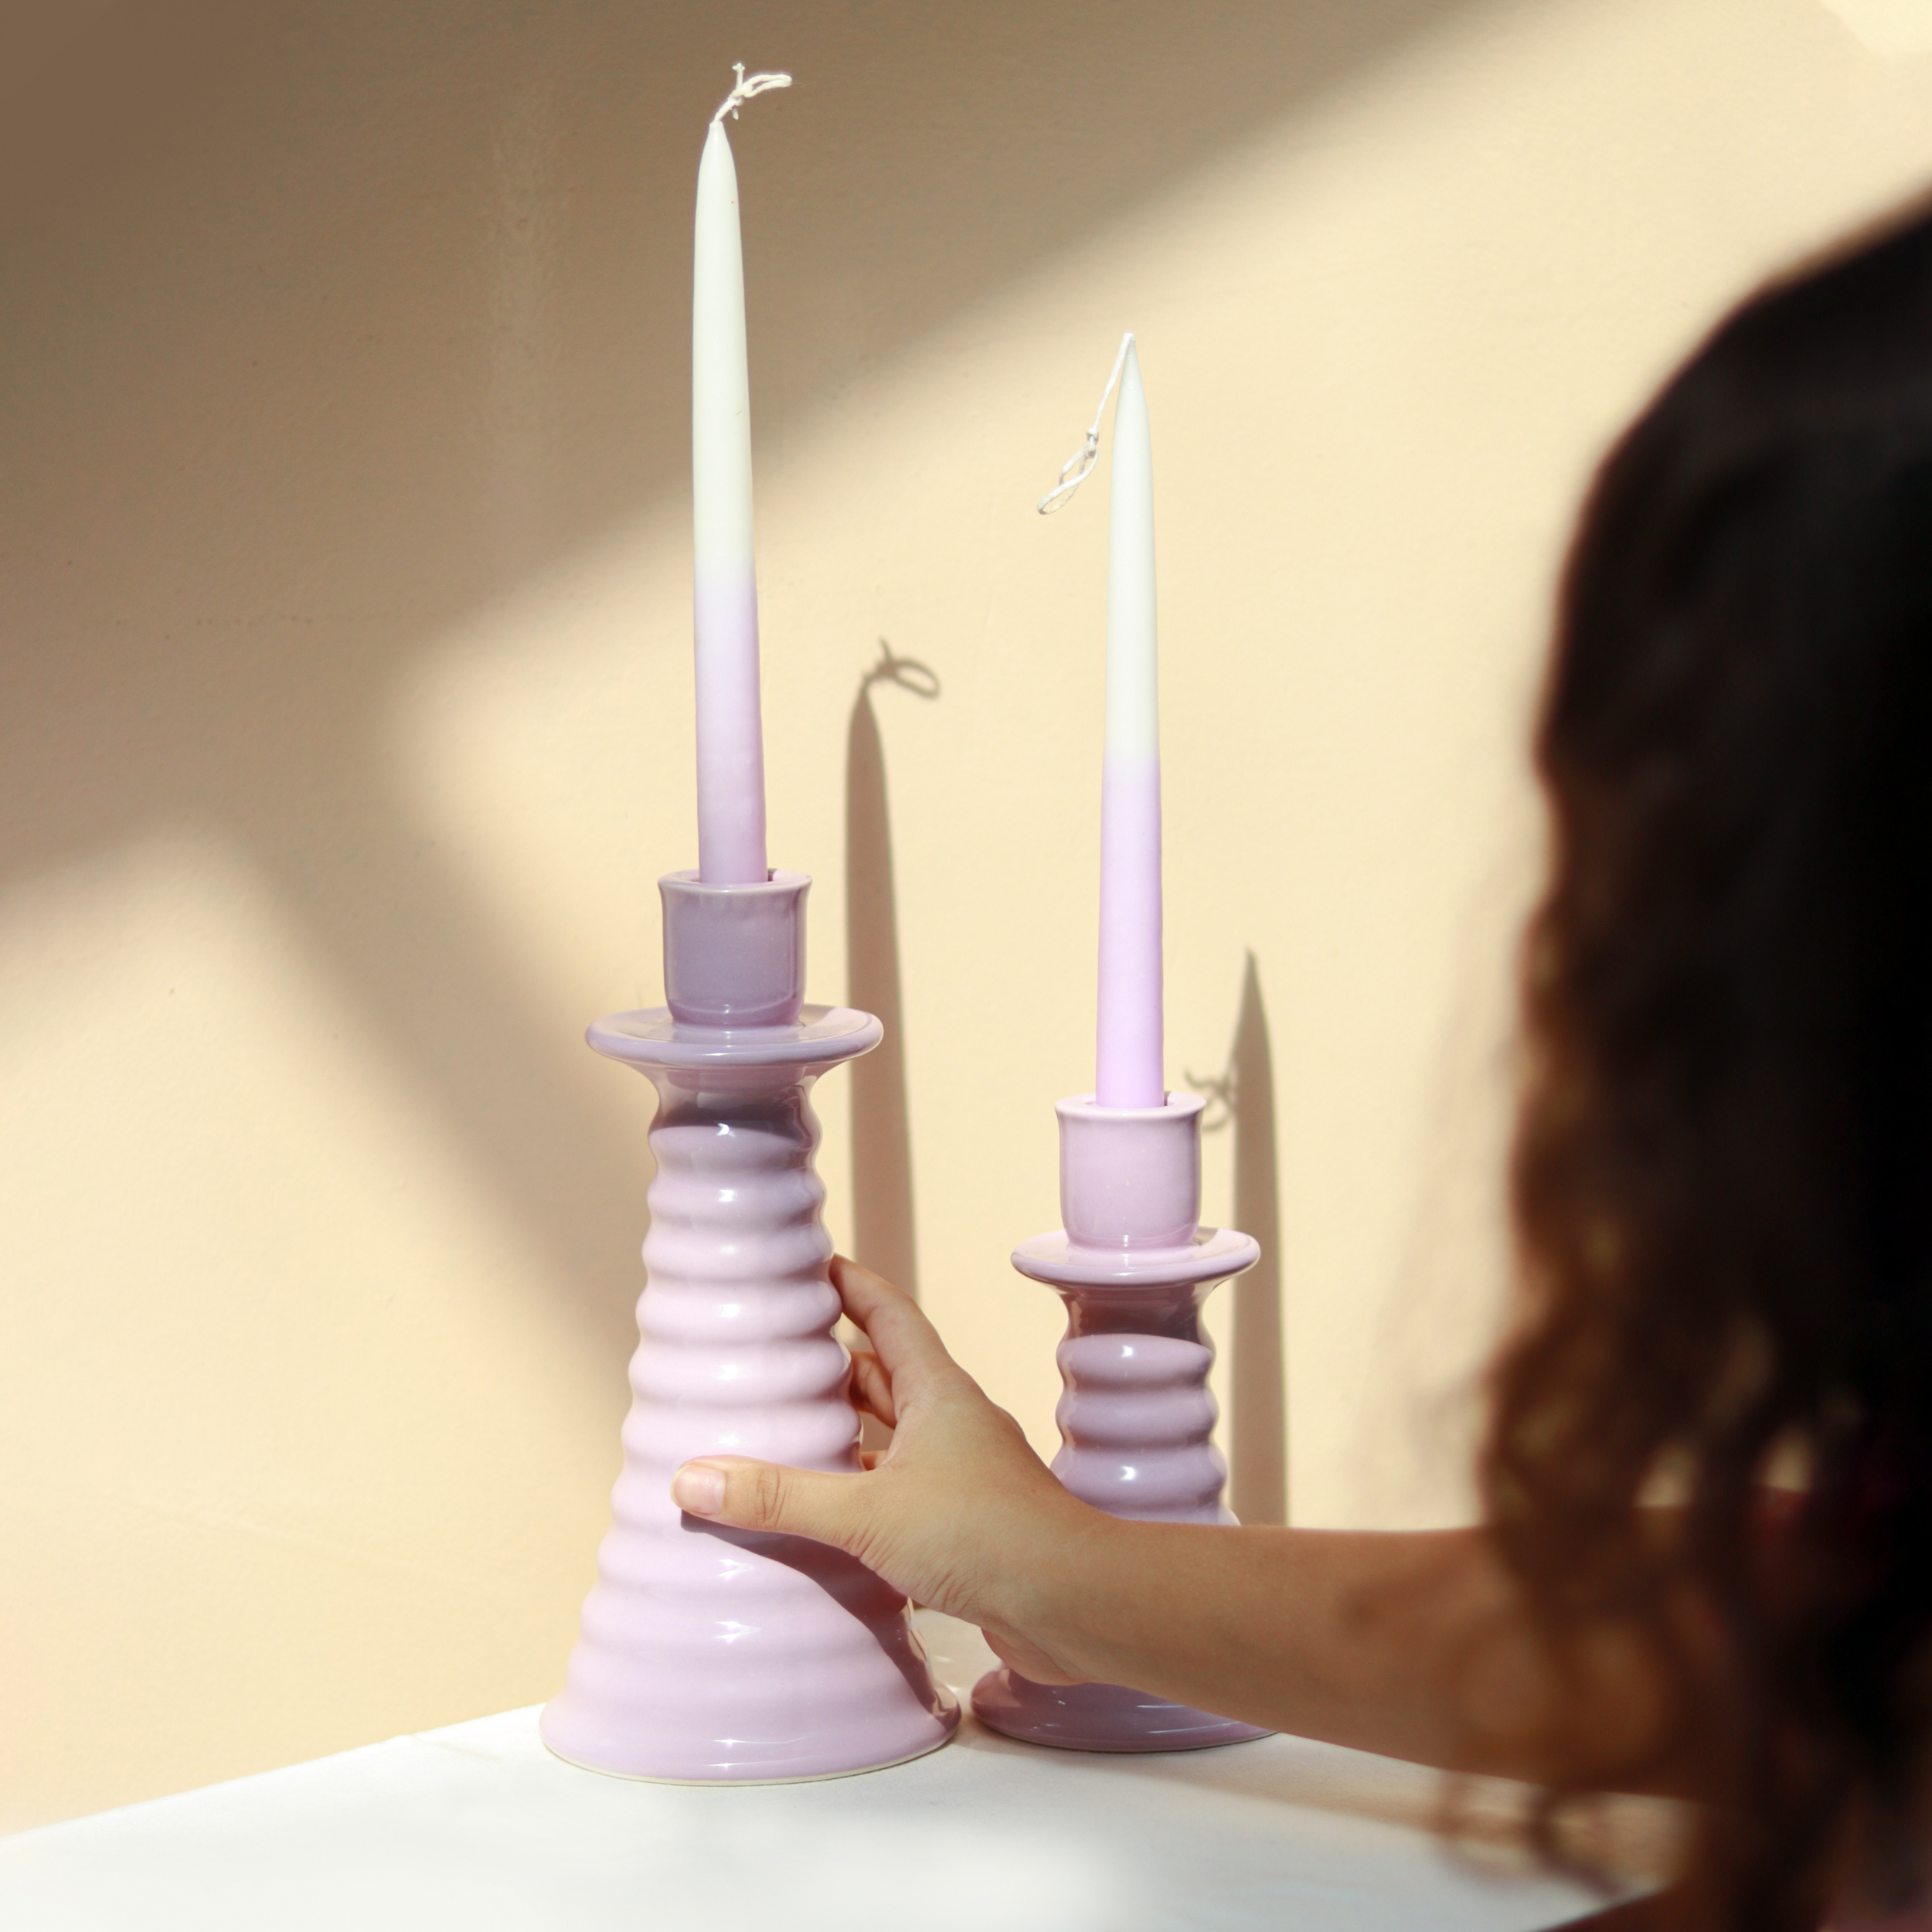 Lilac Coil Gift Box - Two Ombre Candles + Two Candle holders (Unpacked)